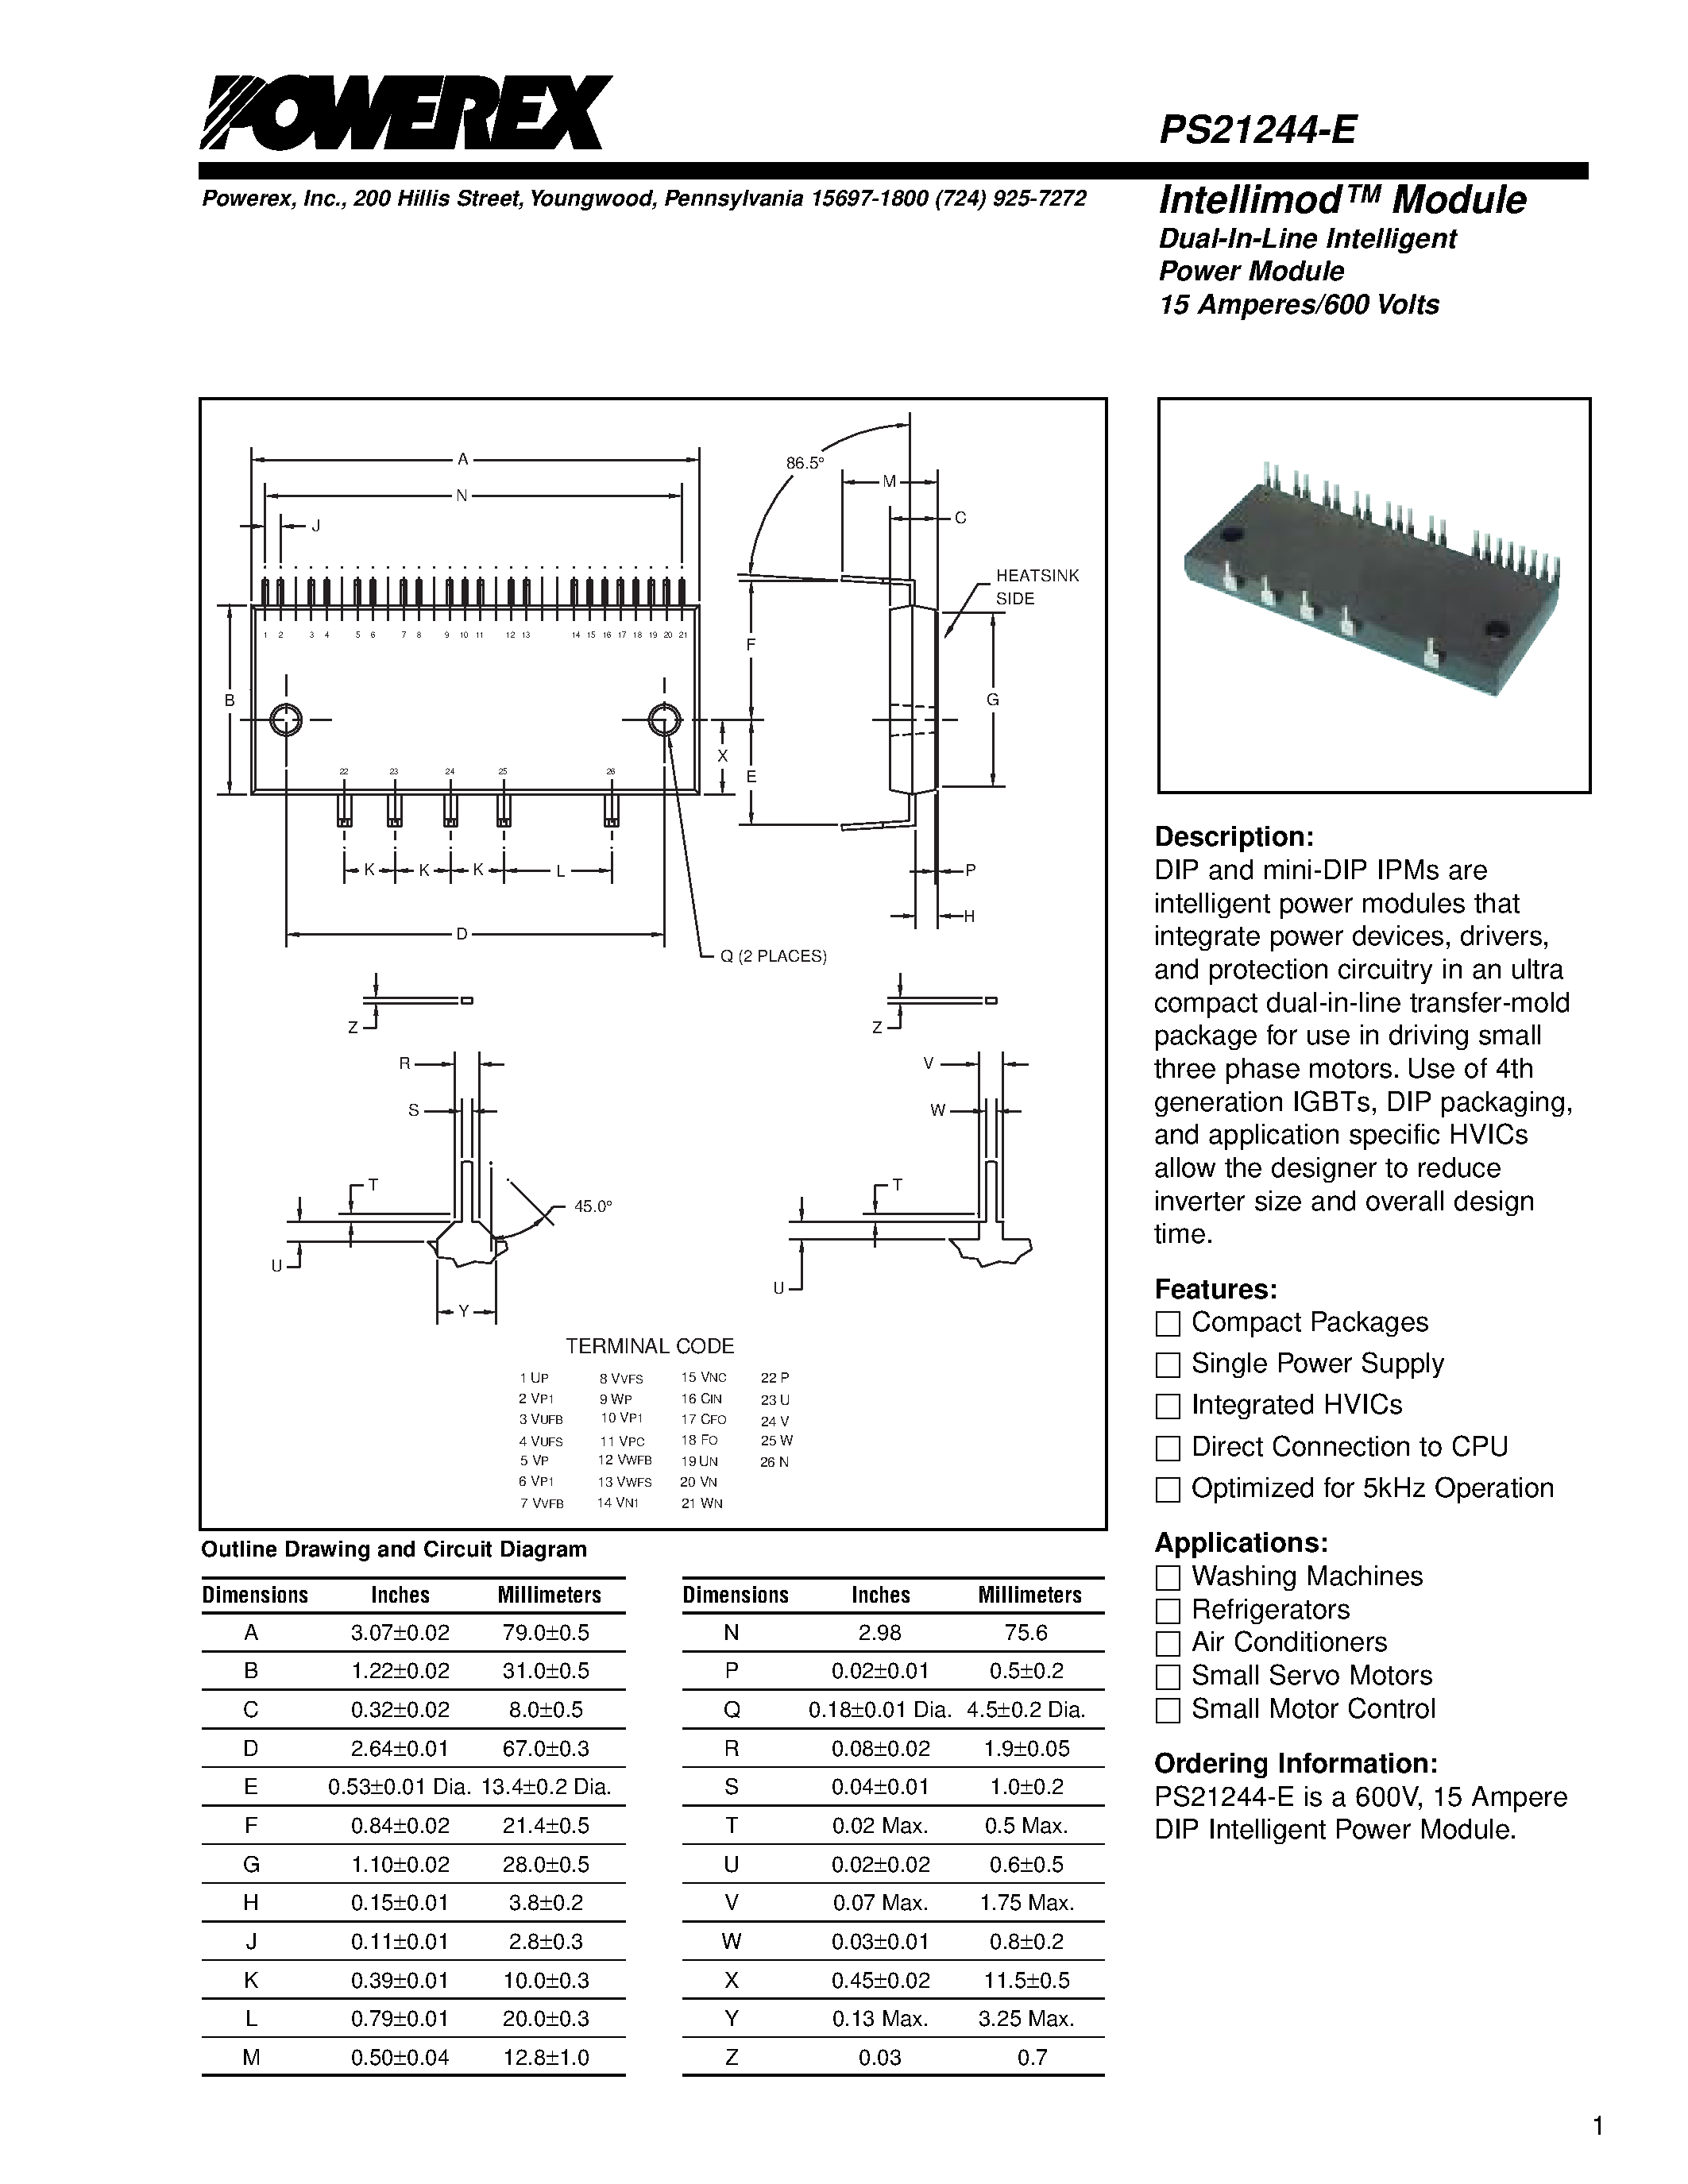 Datasheet PS21244-E - Intellimod Module Dual-In-Line Intelligent Power Module (15 Amperes/600 Volts) page 1